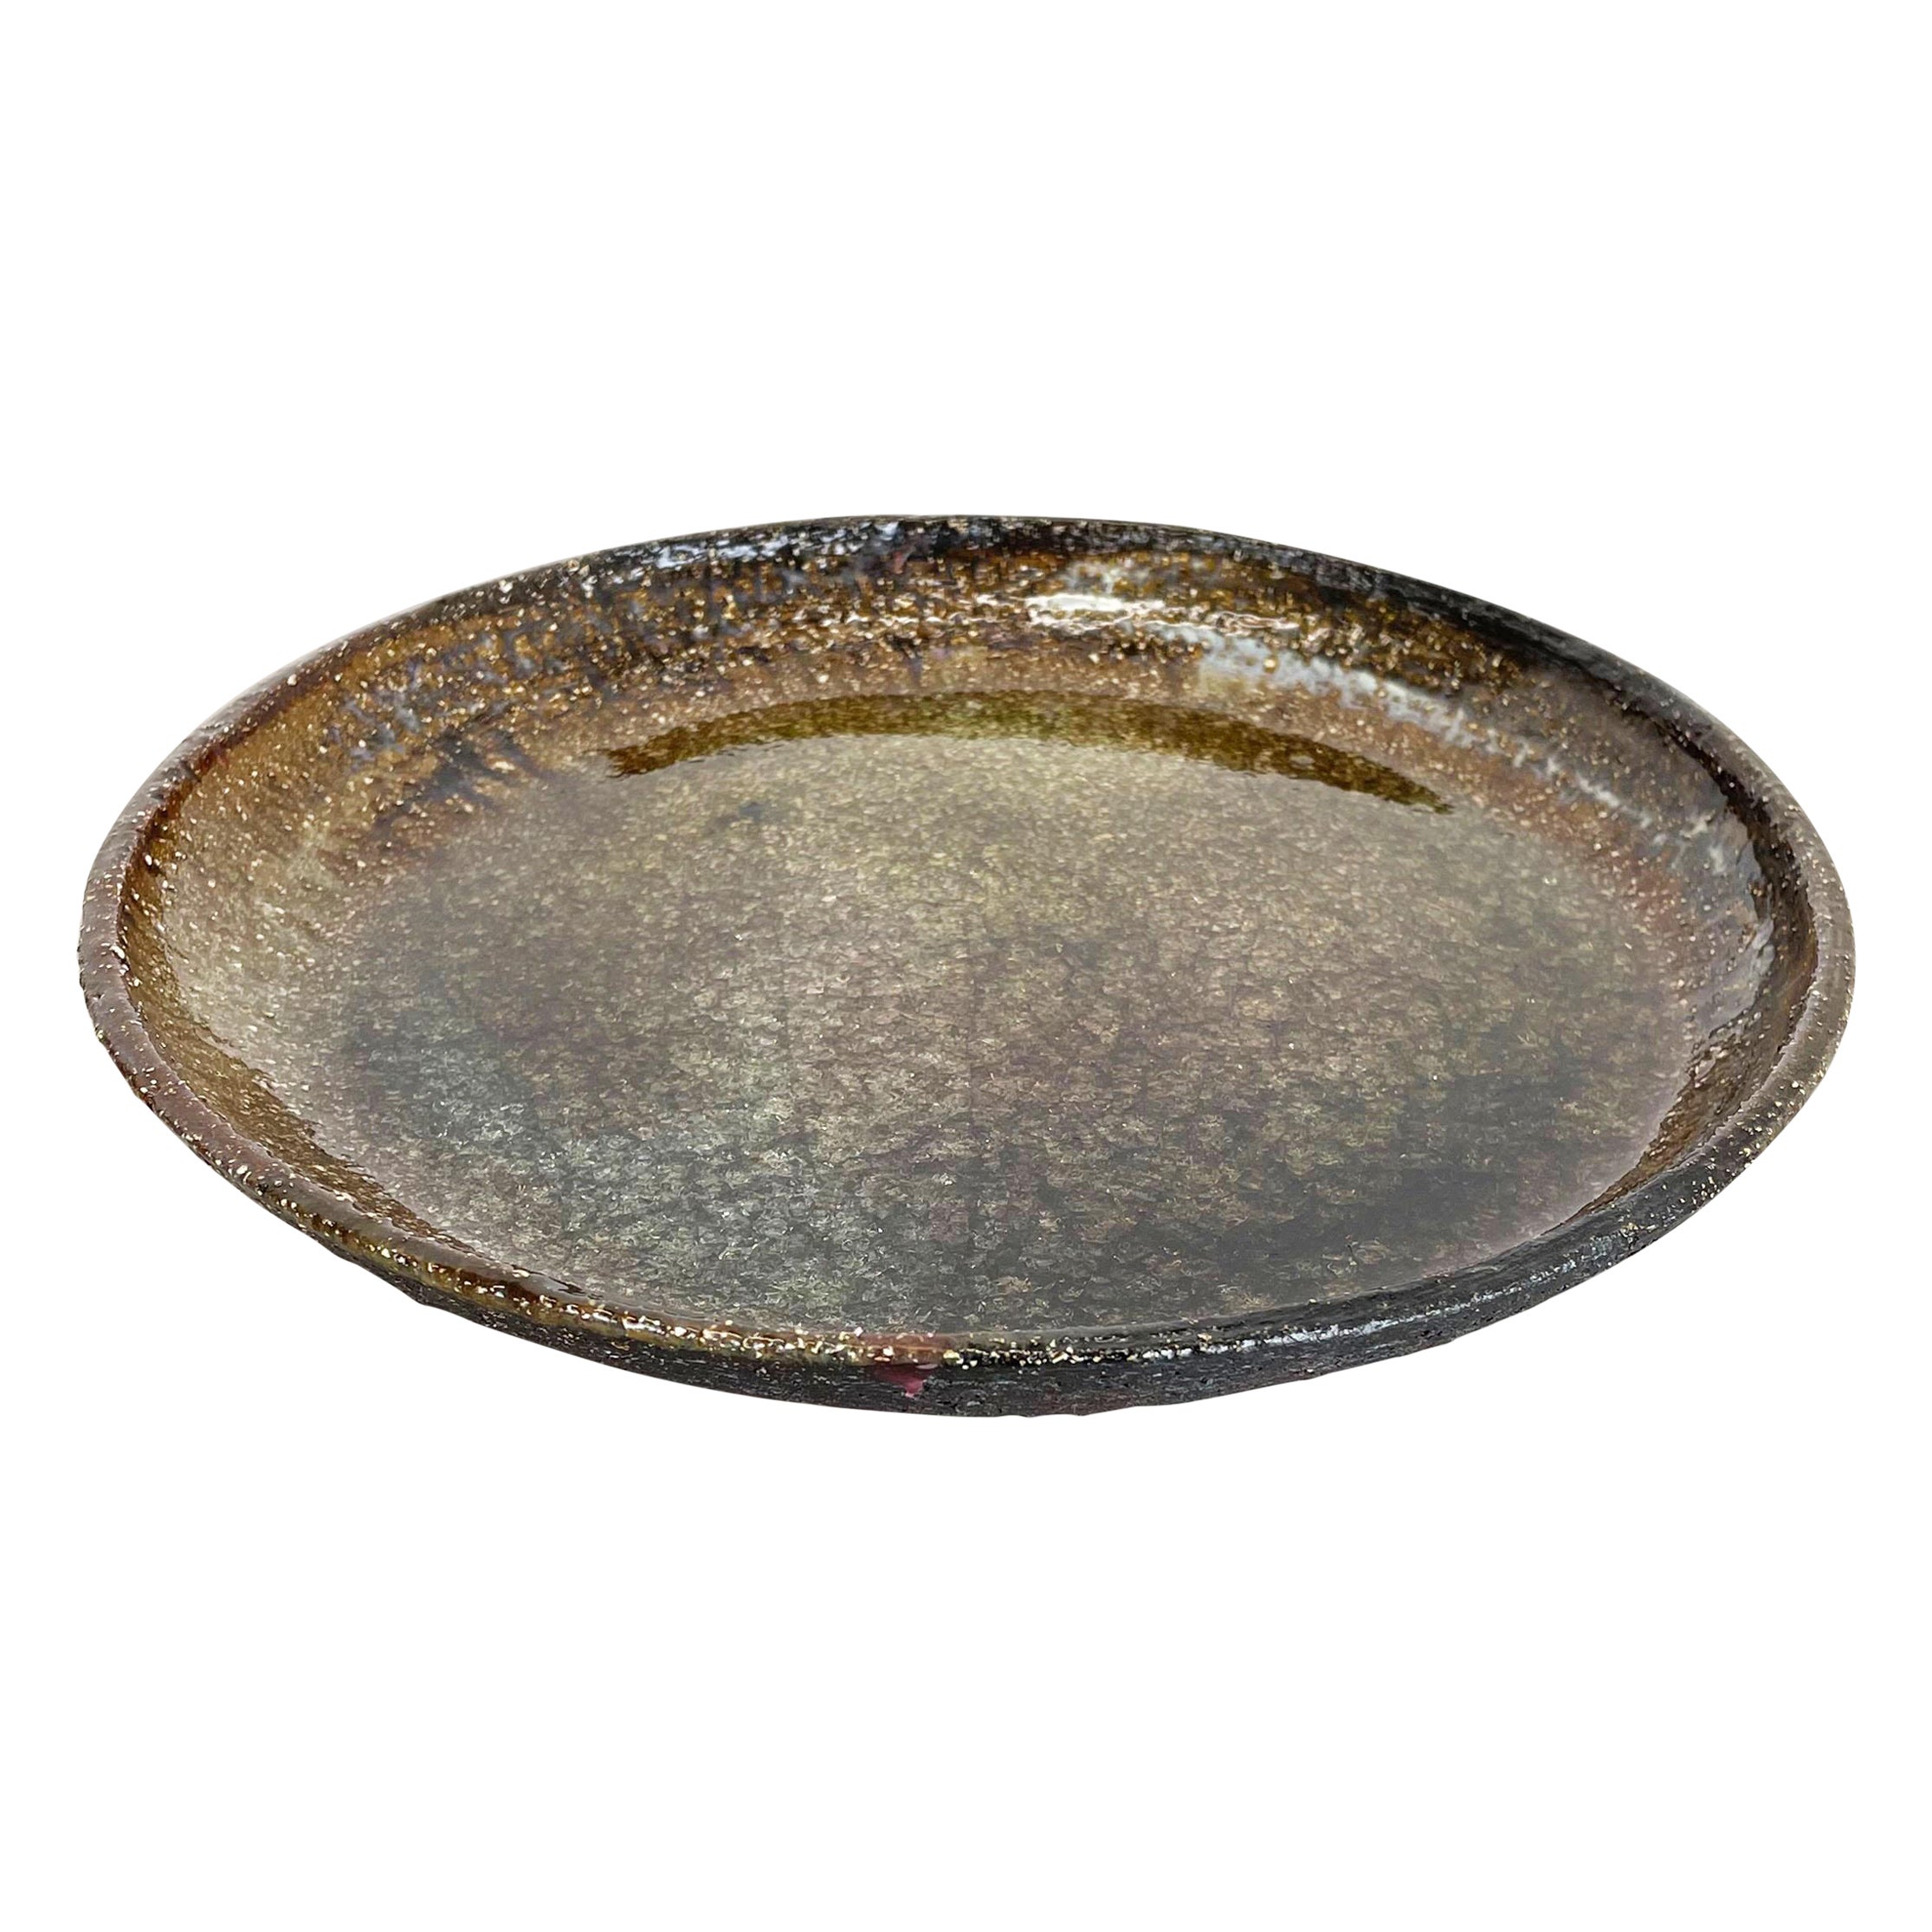 Ceramic Studio Pottery Bowl Shell Element by Gerhard Liebenthron, Germany, 1970s For Sale